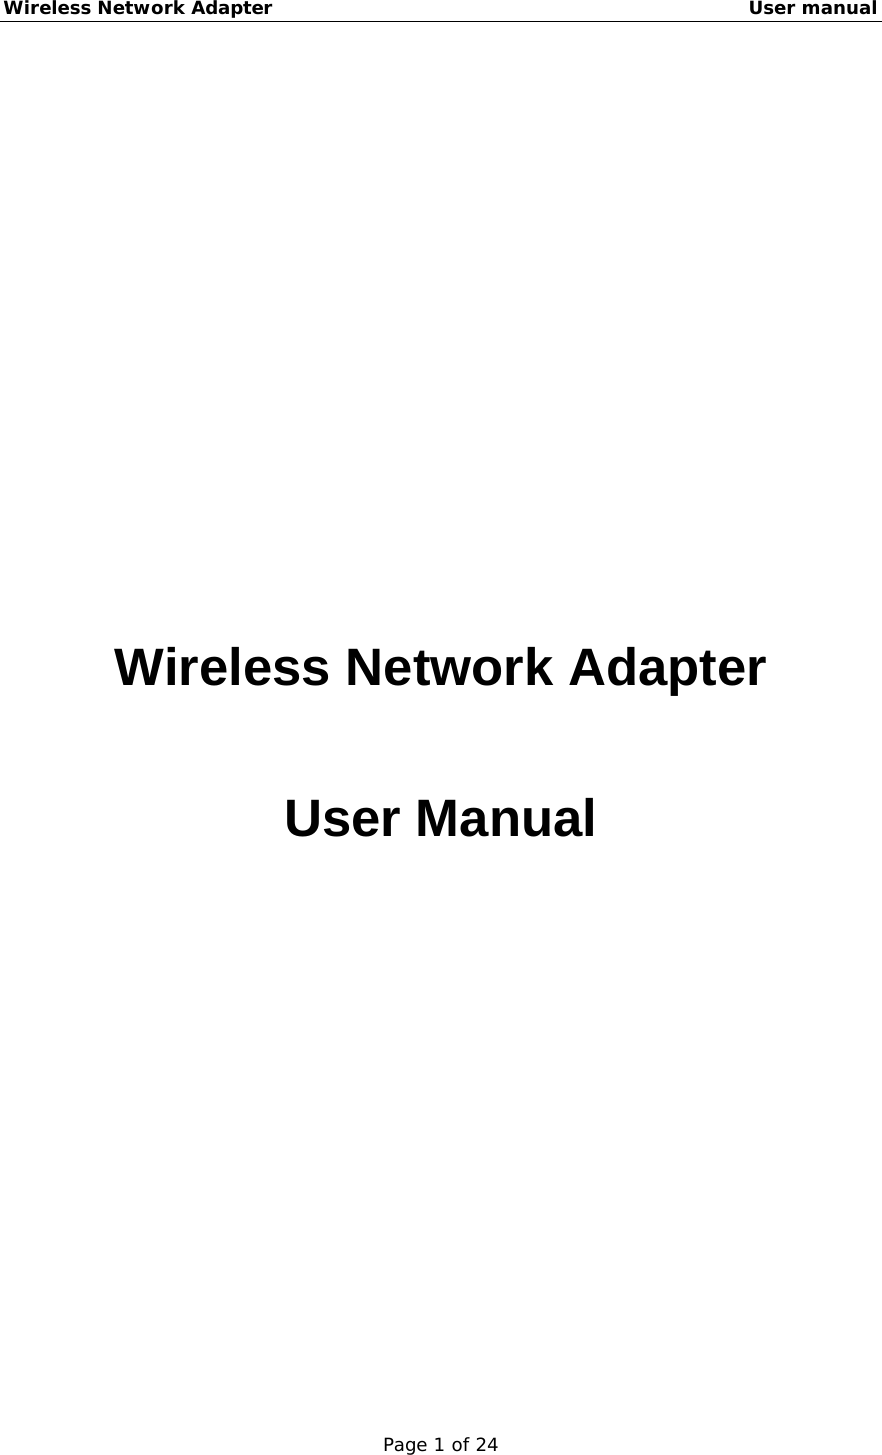 Wireless Network Adapter                                                    User manual Page 1 of 24                   Wireless Network Adapter  User Manual 